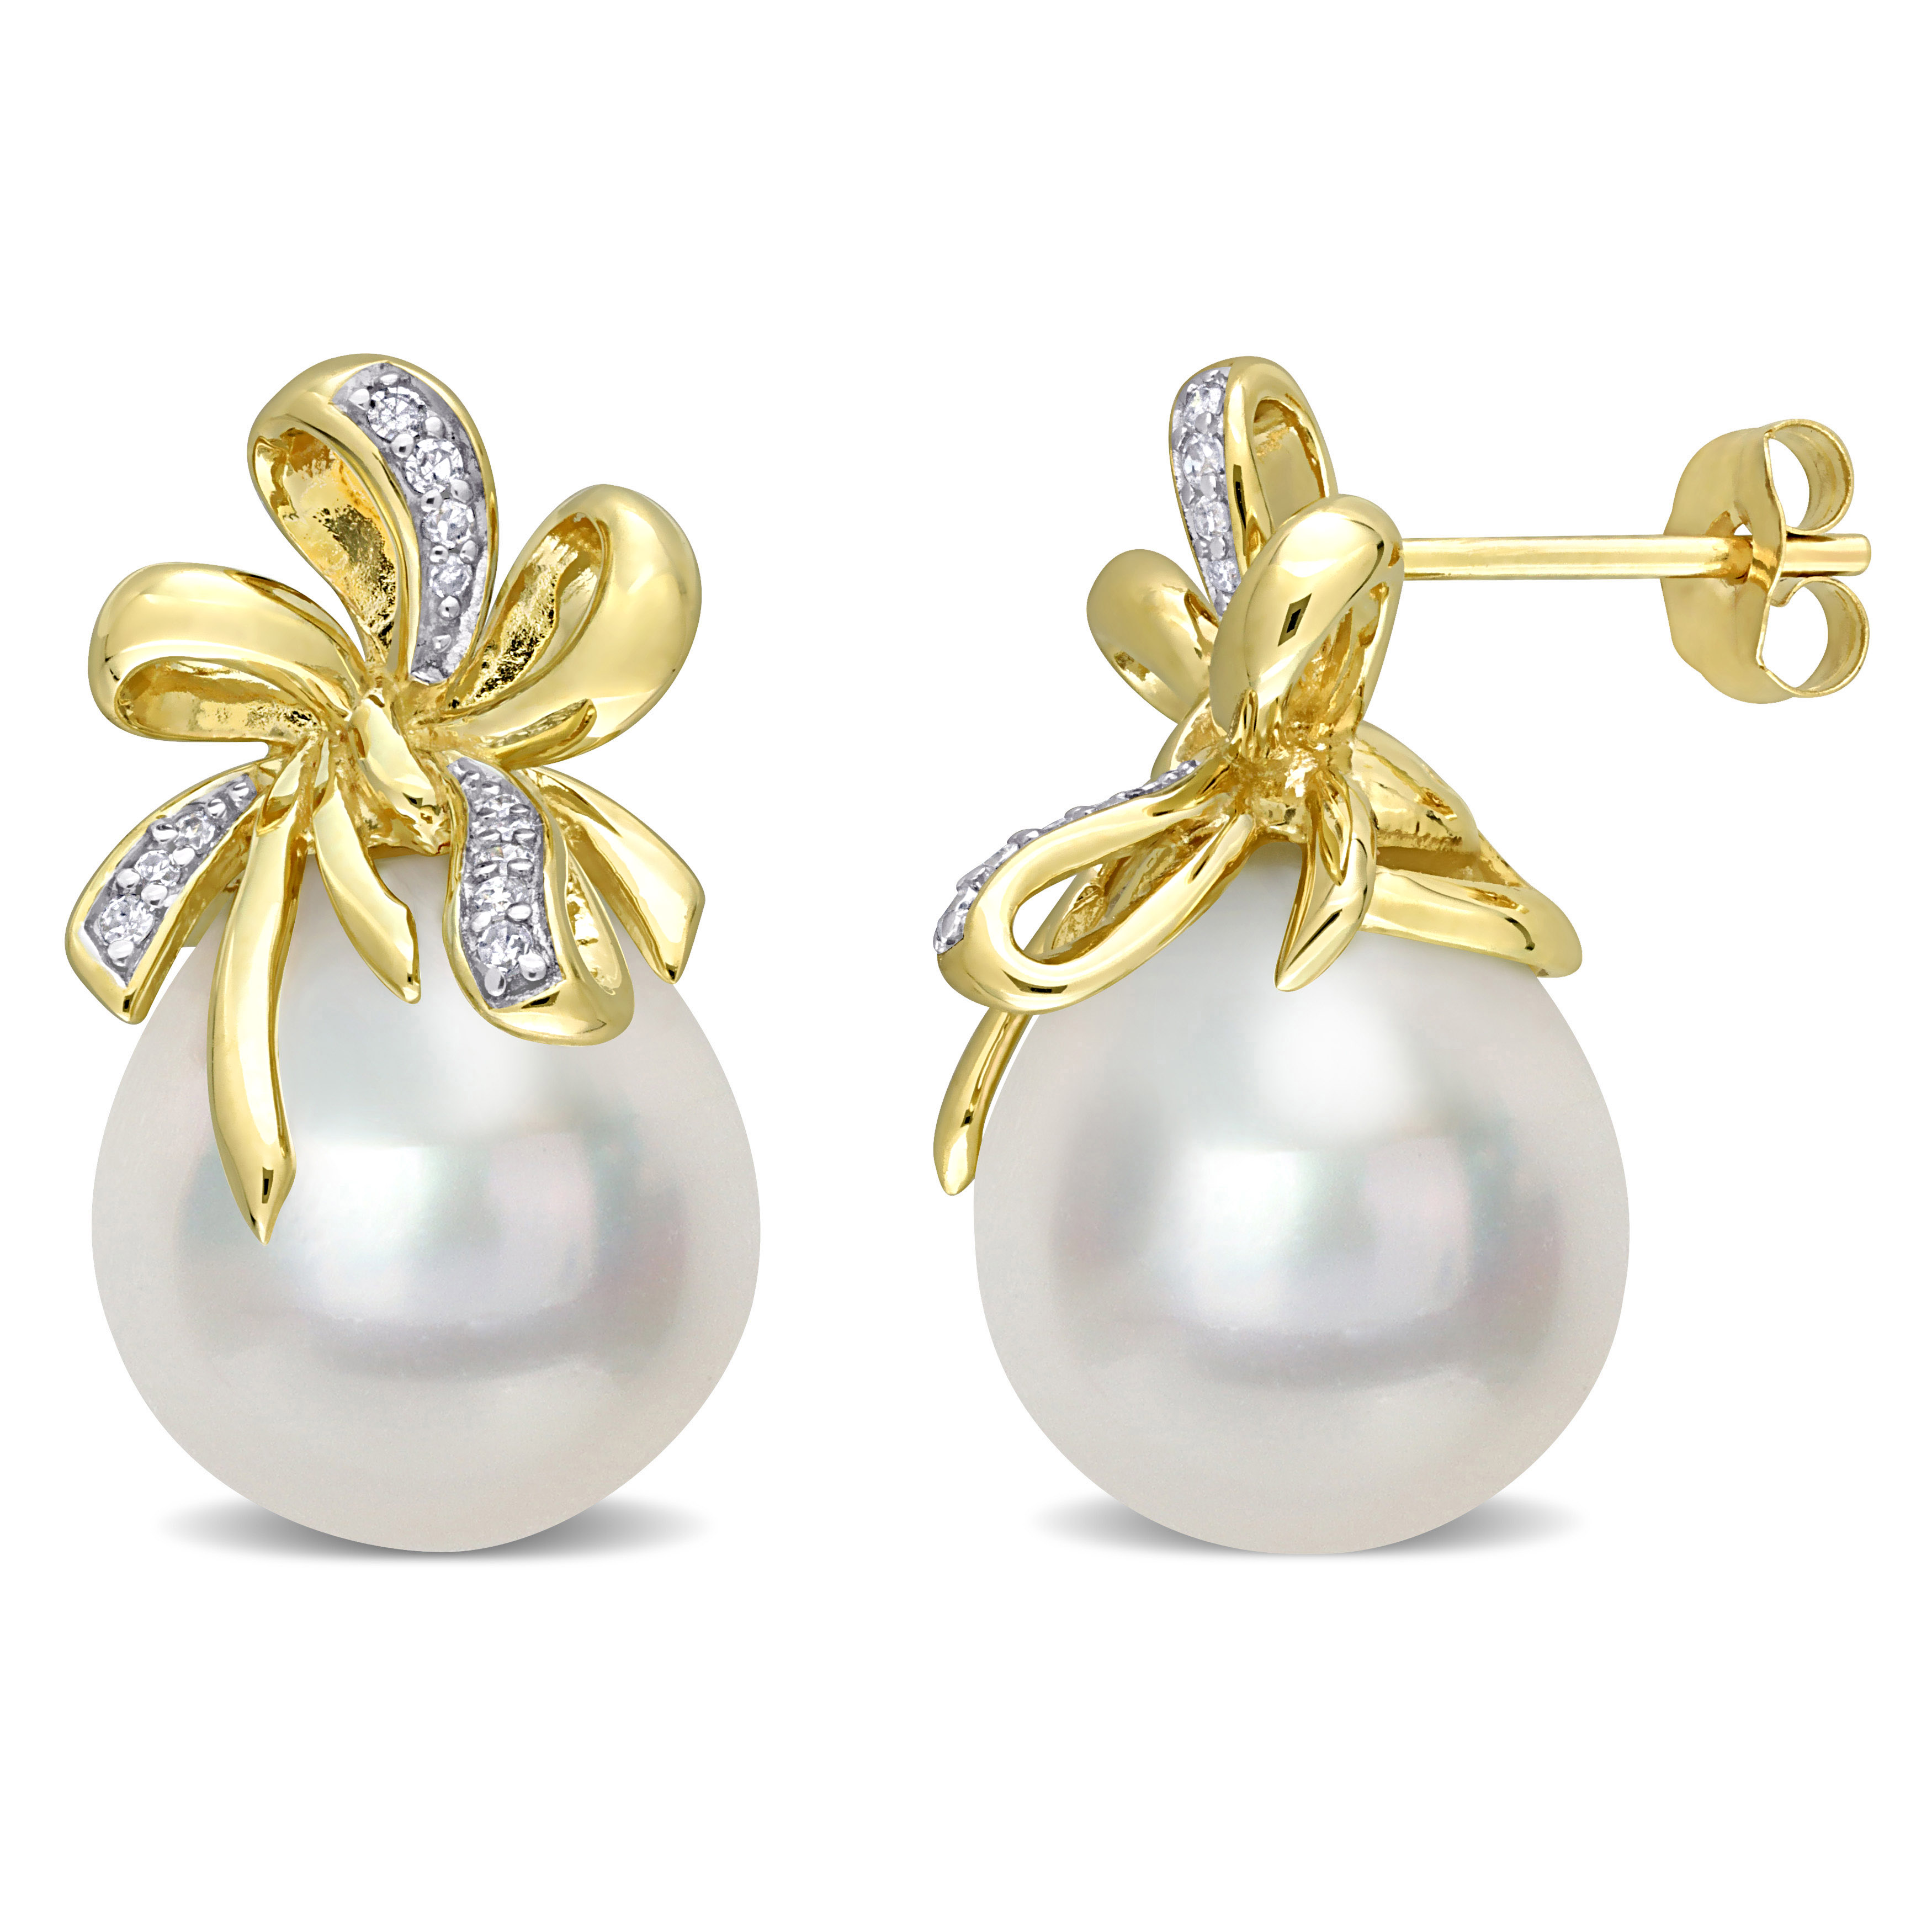 12 - 12.5 MM South Sea Cultured Pearl and 1/10 CT TW Diamond Floral Earrings in 10k Yellow Gold